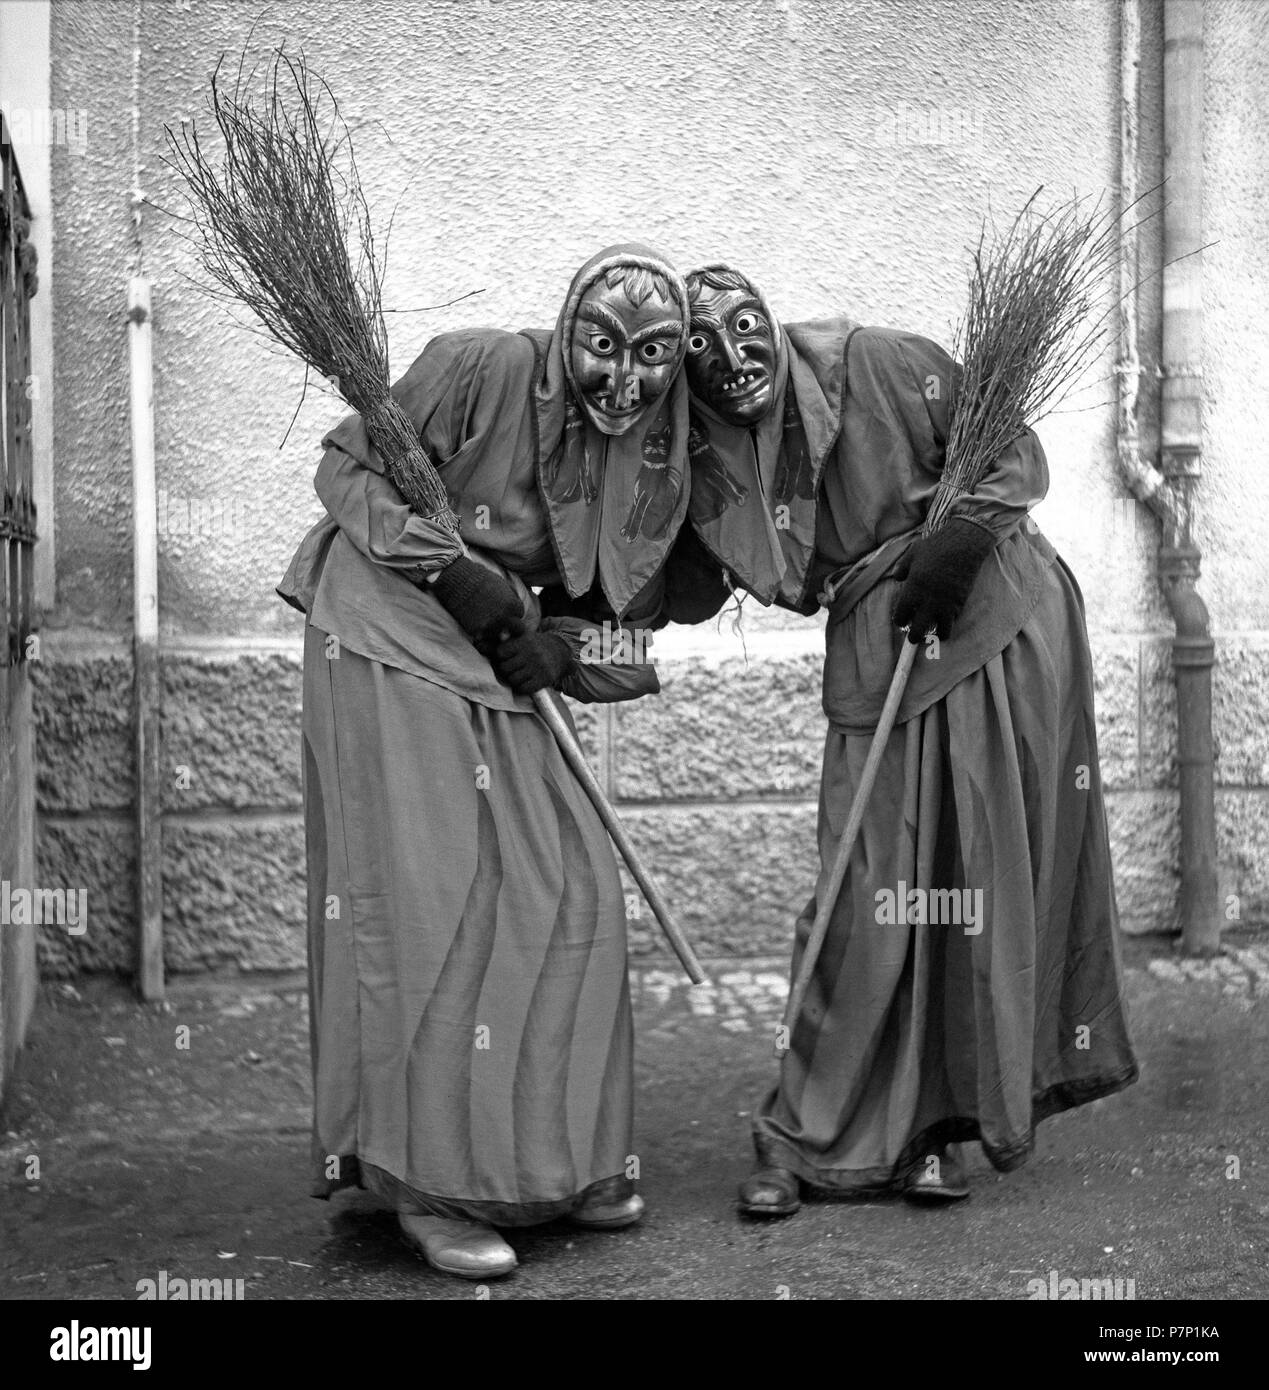 Witches with broom in hand, carnival, around 1950, Freiburg, Germany Stock Photo